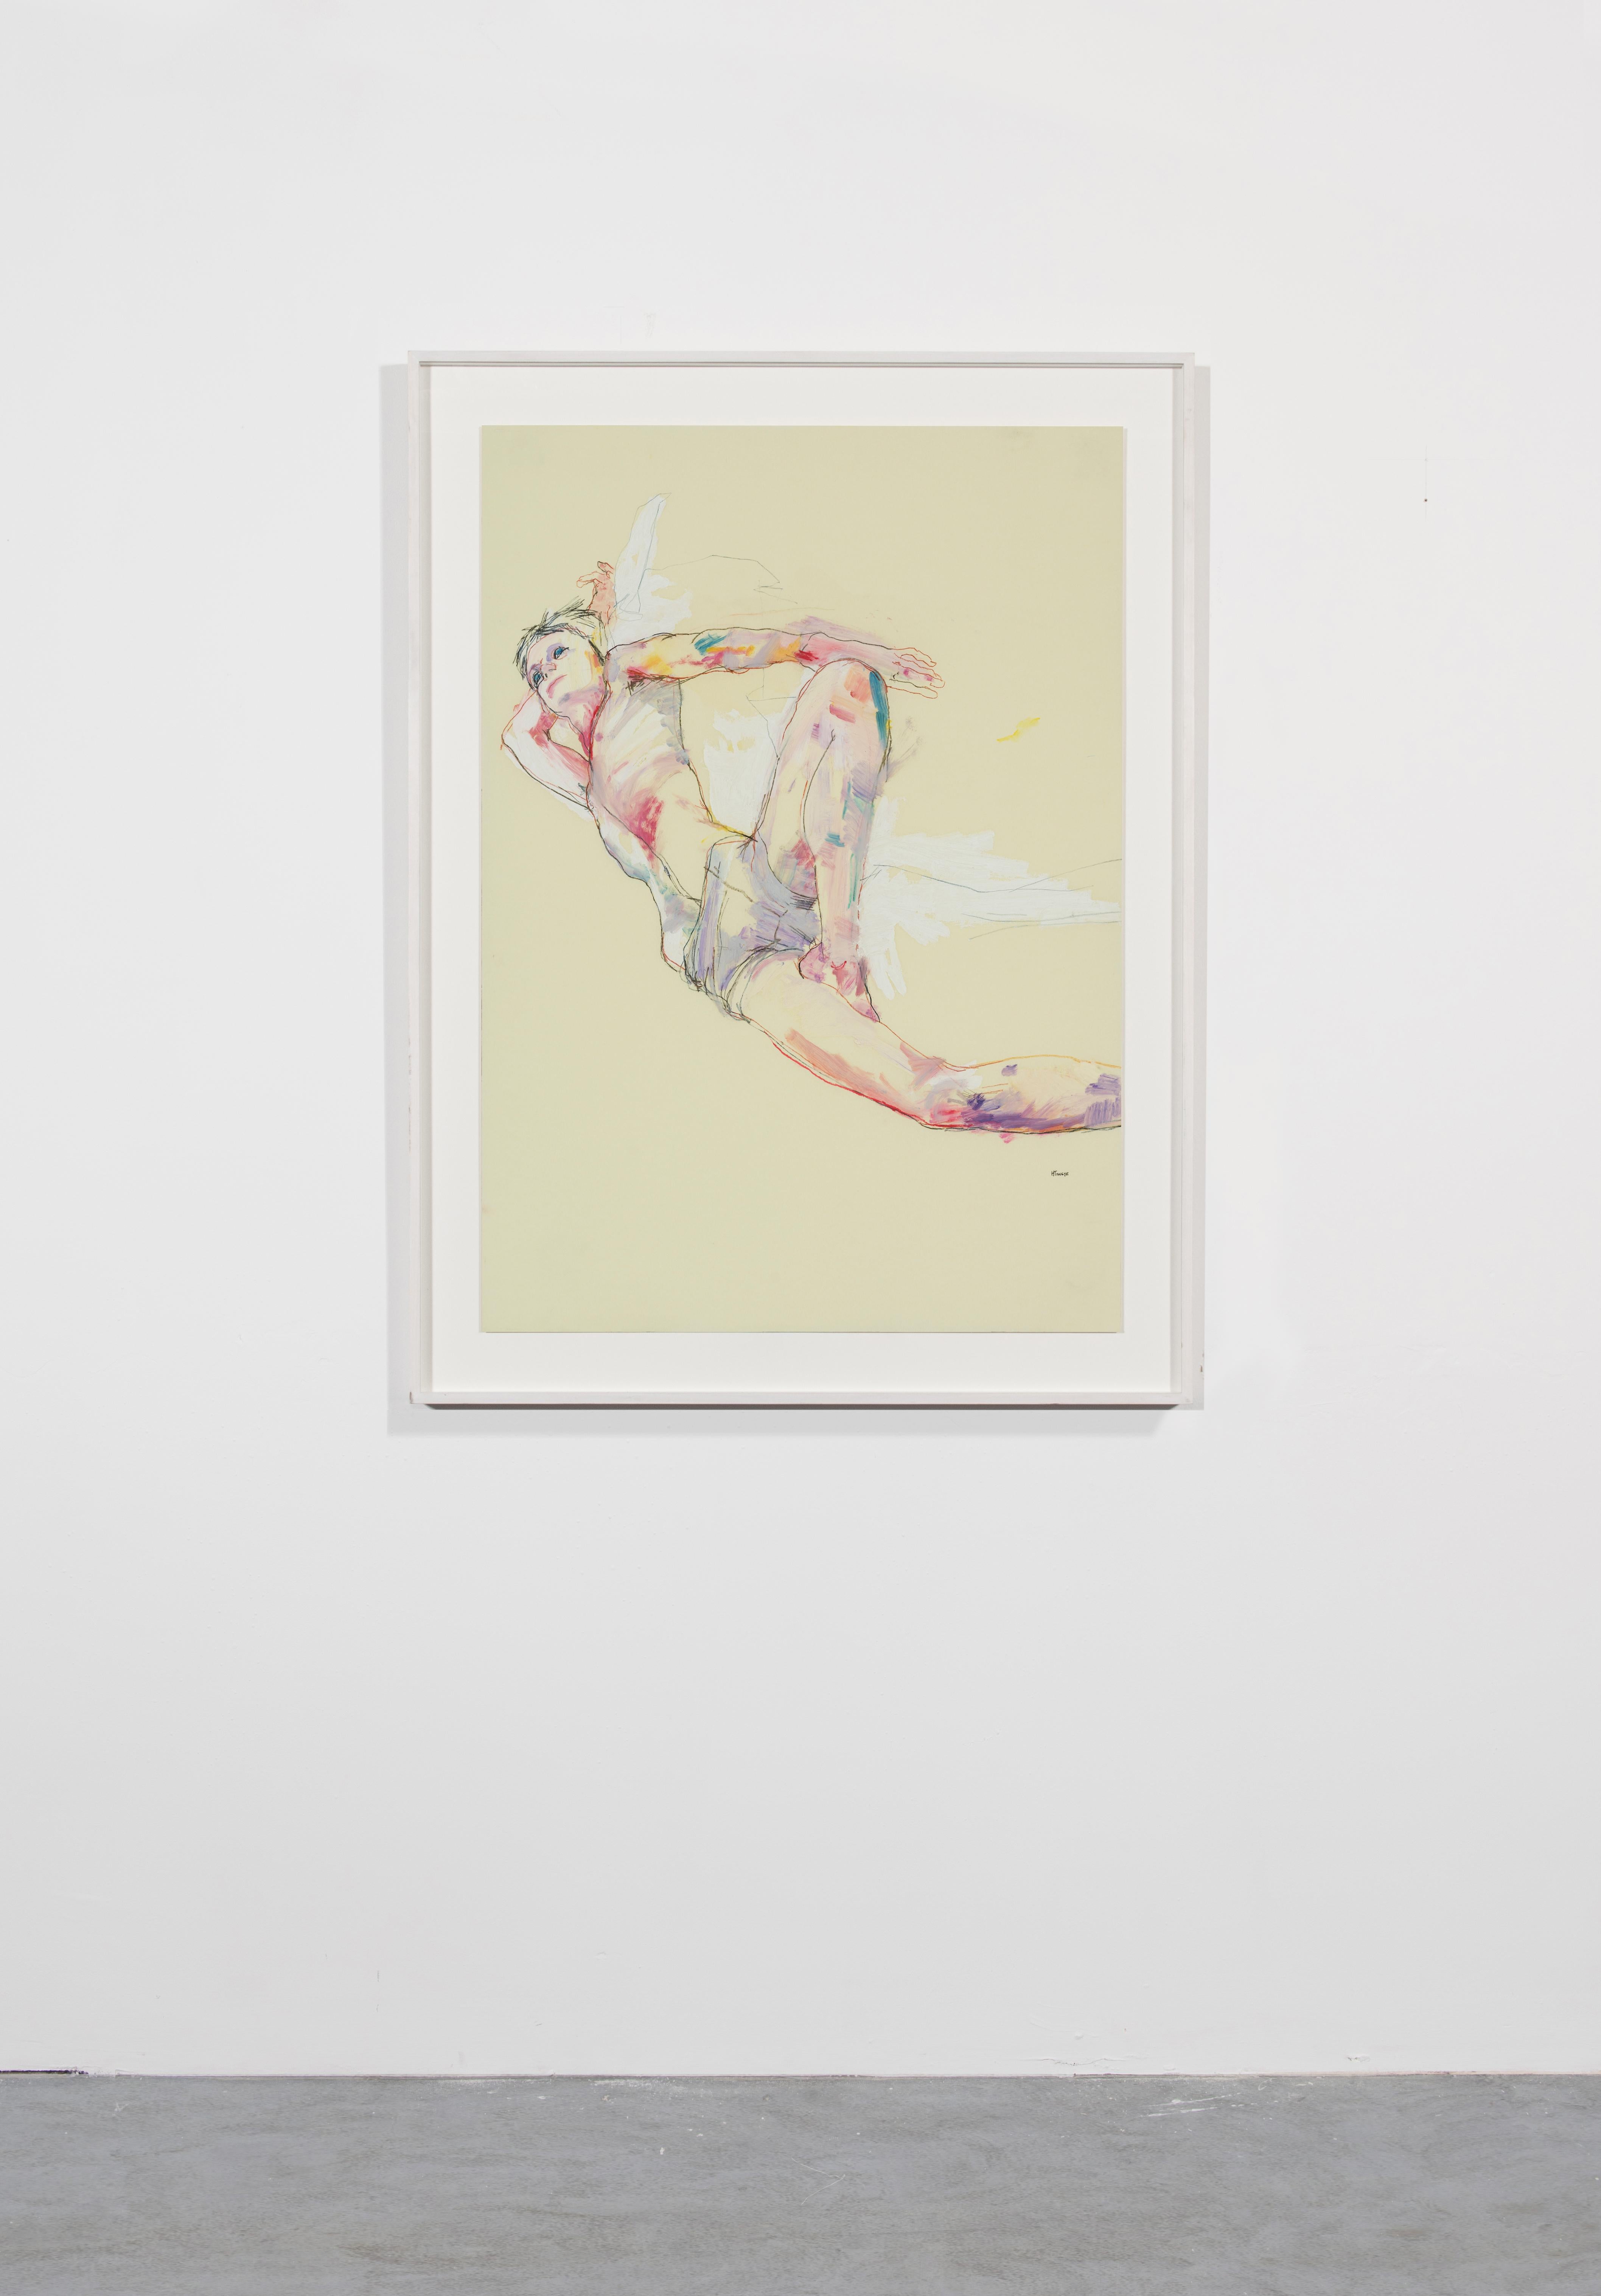 Andrew (Lying Down, Hand Behind Head), Mixed media on Pergamenata parchment - Contemporary Painting by Howard Tangye